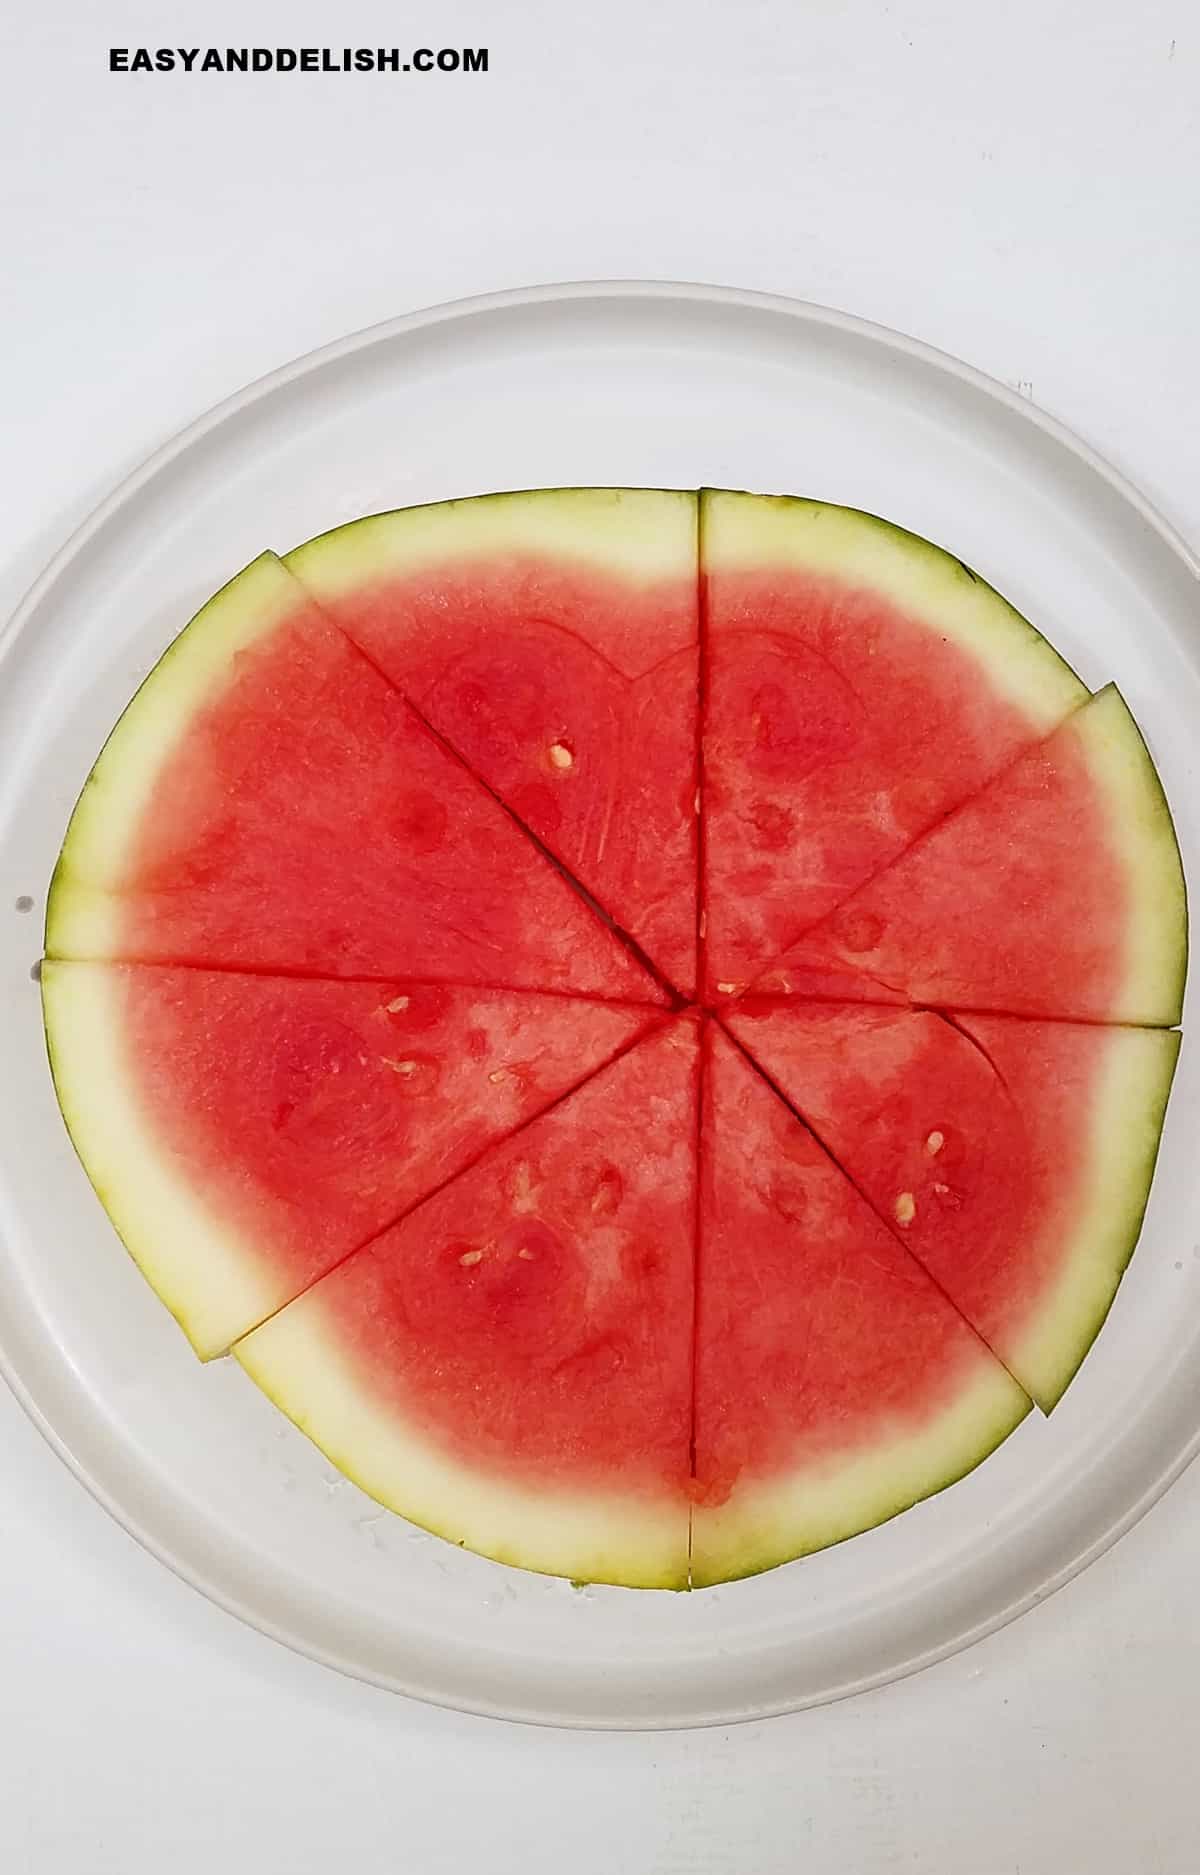 a slice of the summer fruit in a plate cut into wedges.